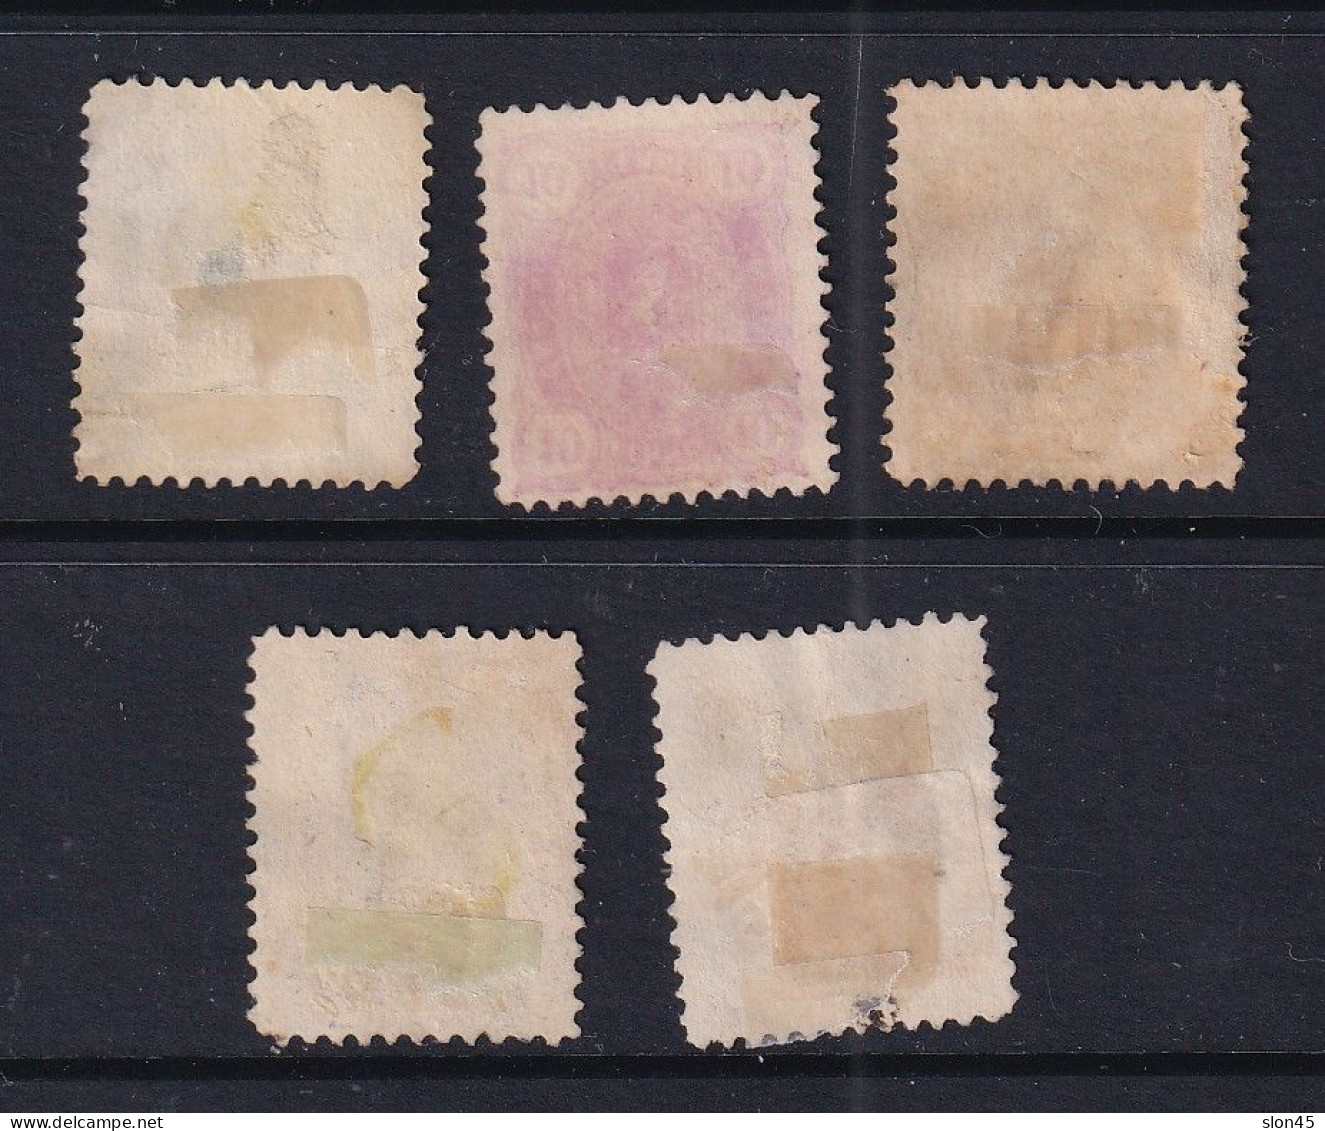 Finland 1885 Perf 12.5 Selection Used CV $ 41 15880 - Used Stamps